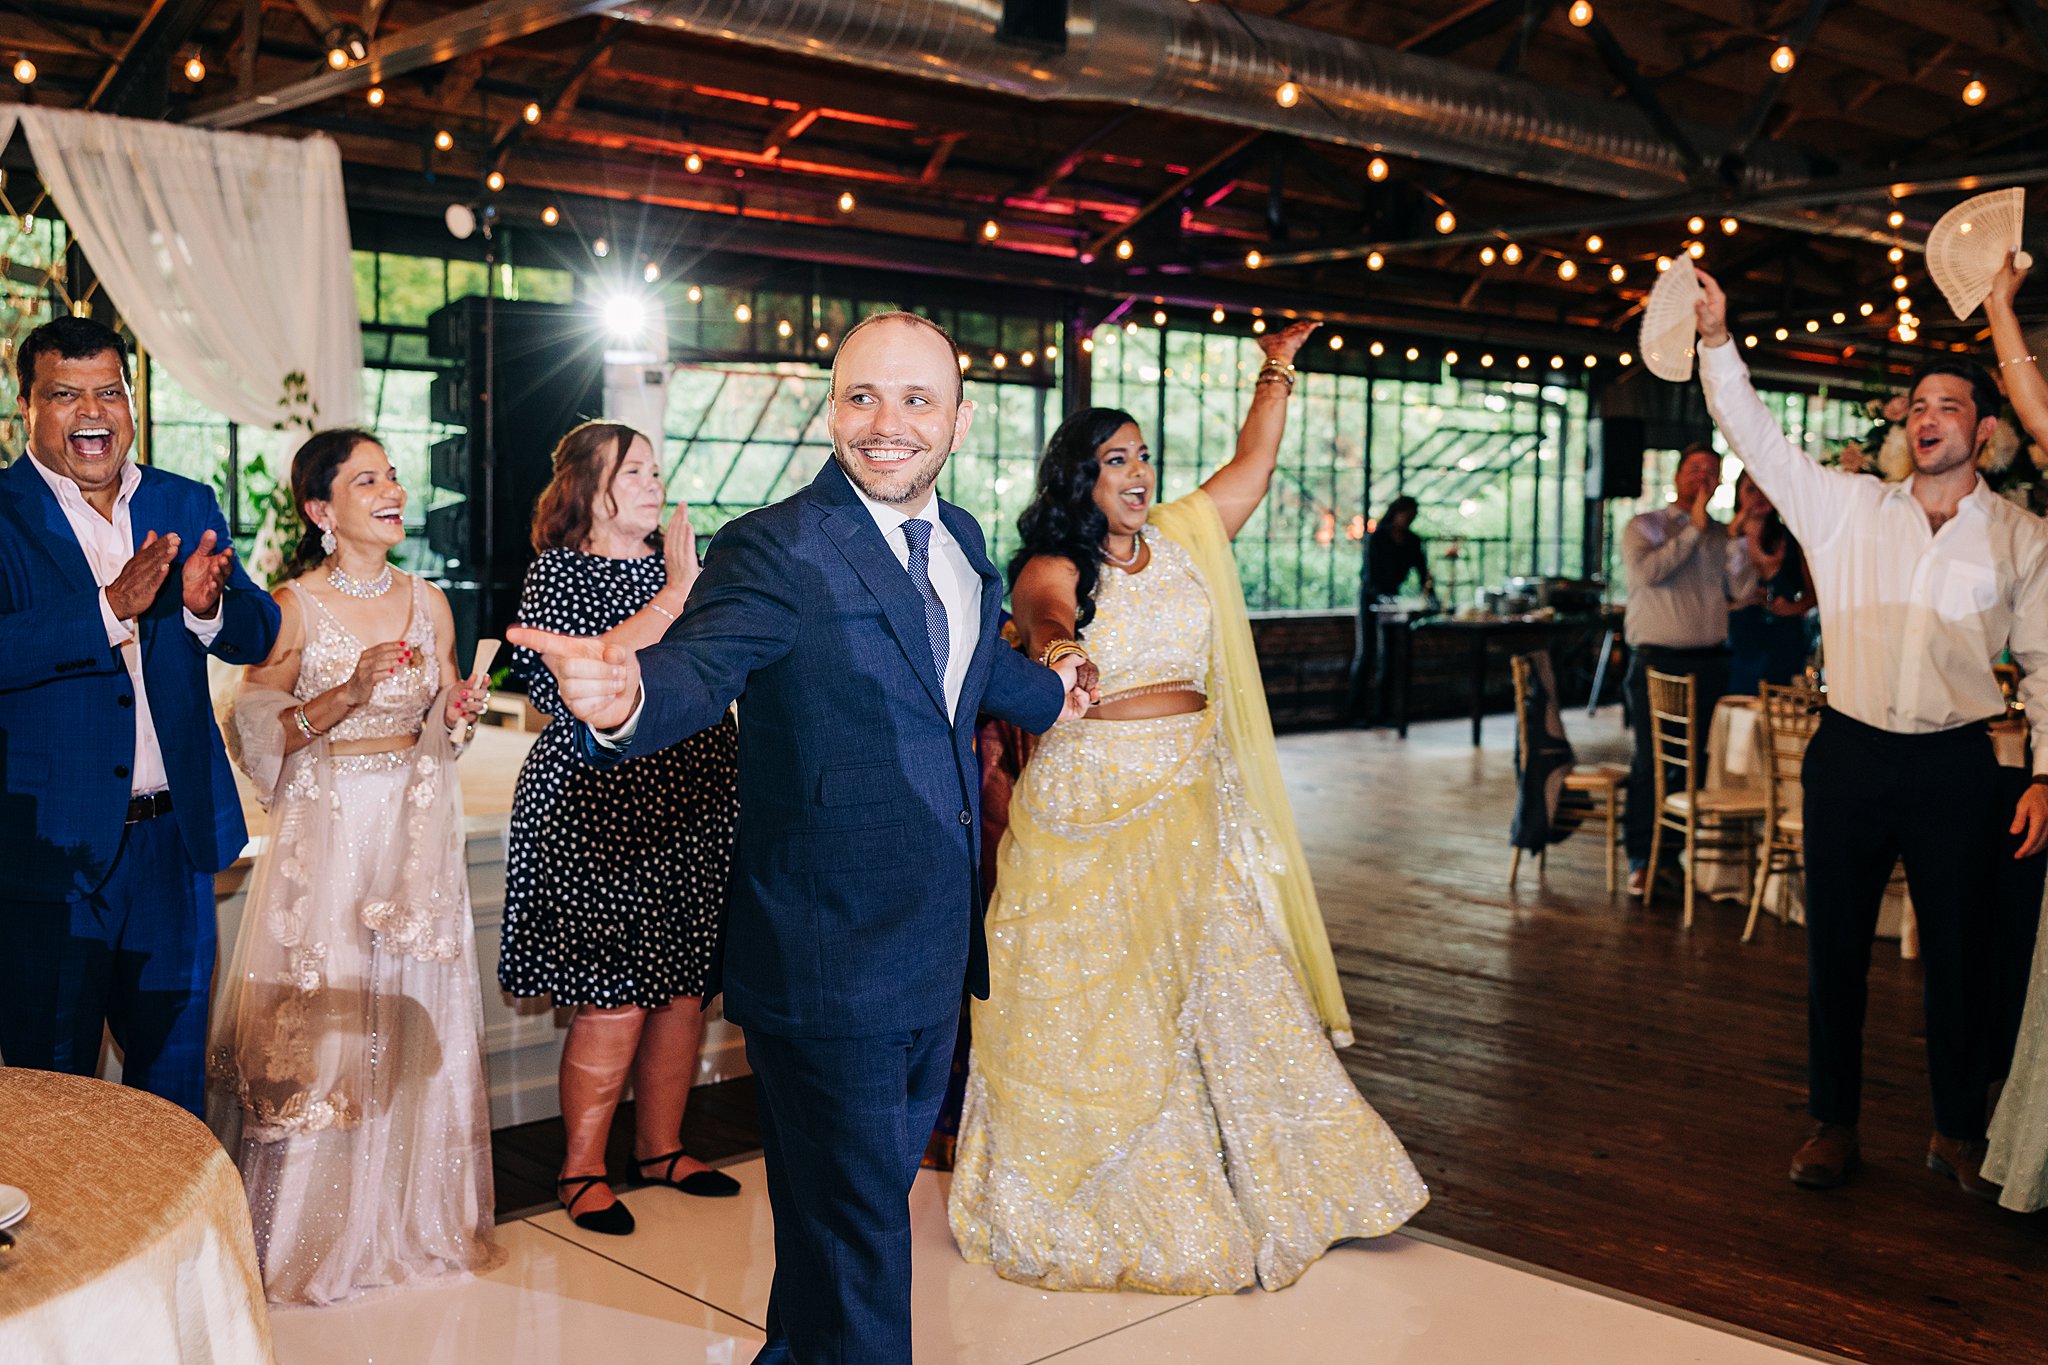 Newlyweds enter their reception to cheers and celebration at their summerour studio wedding reception